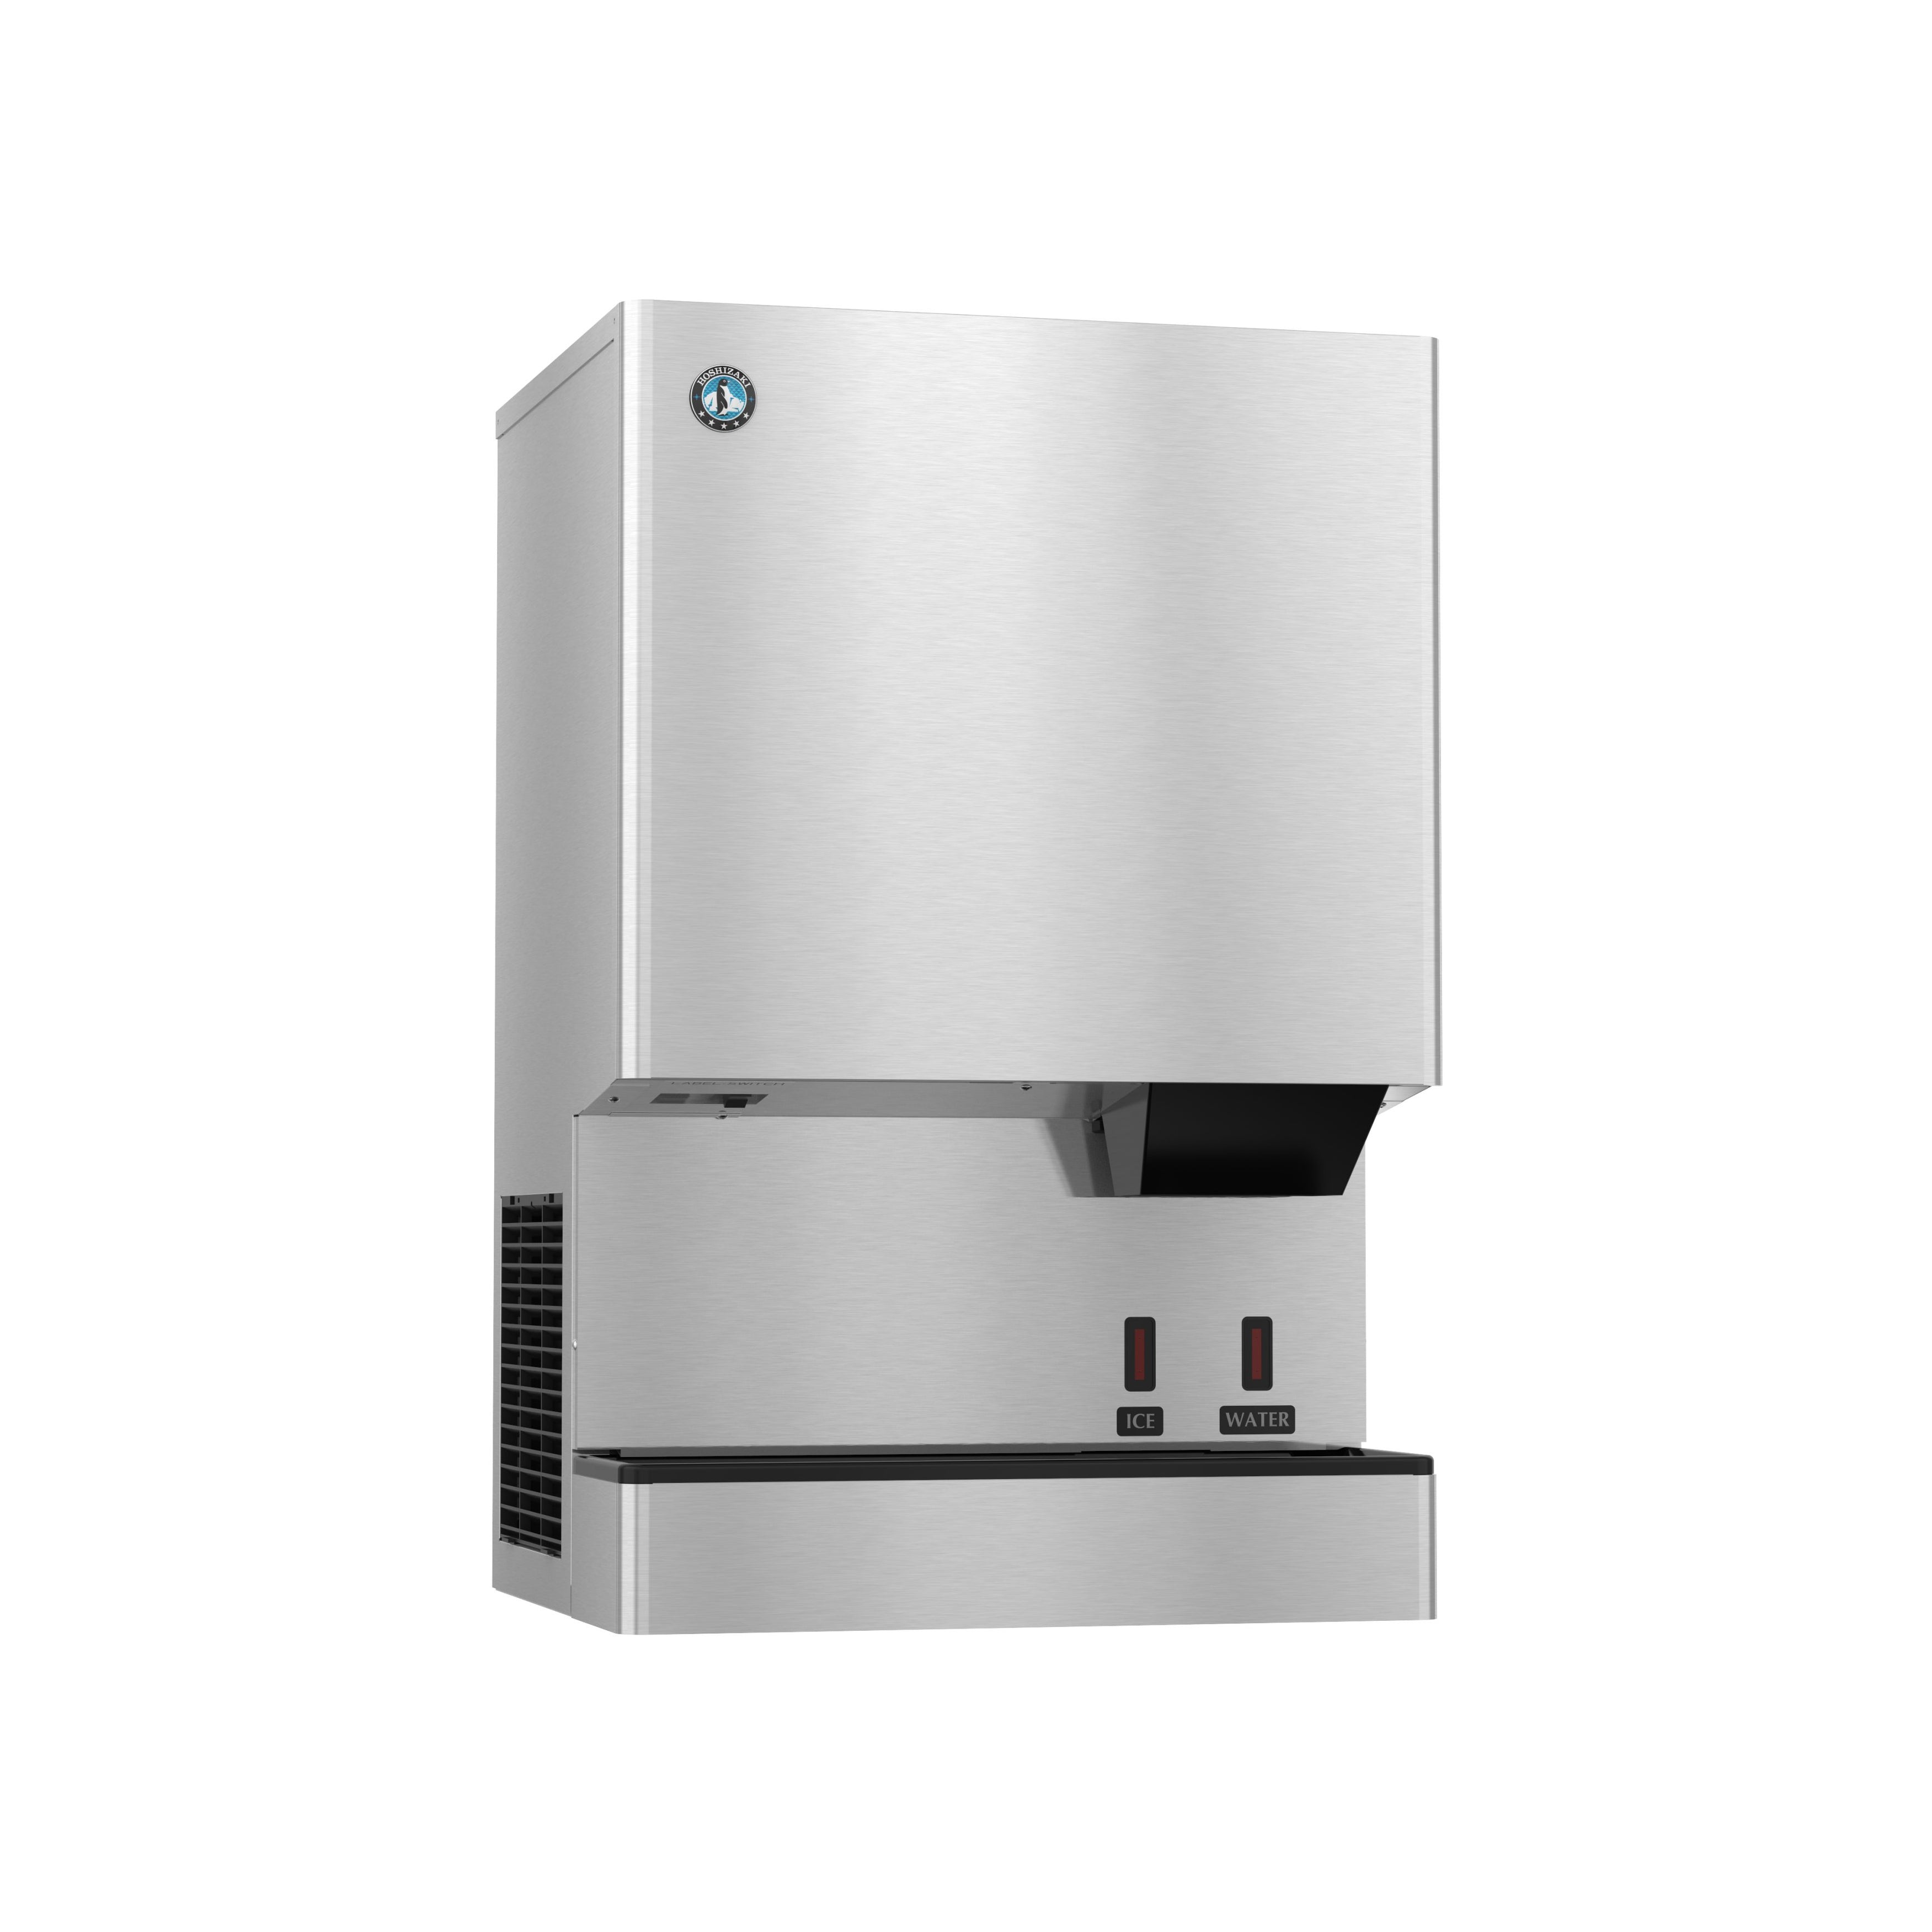 Hoshizaki - DCM-300BAH-OS, Commercial Opti-Serve Countertop Ice Maker and Water Dispenser - 40 lb. Storage Air Cooled